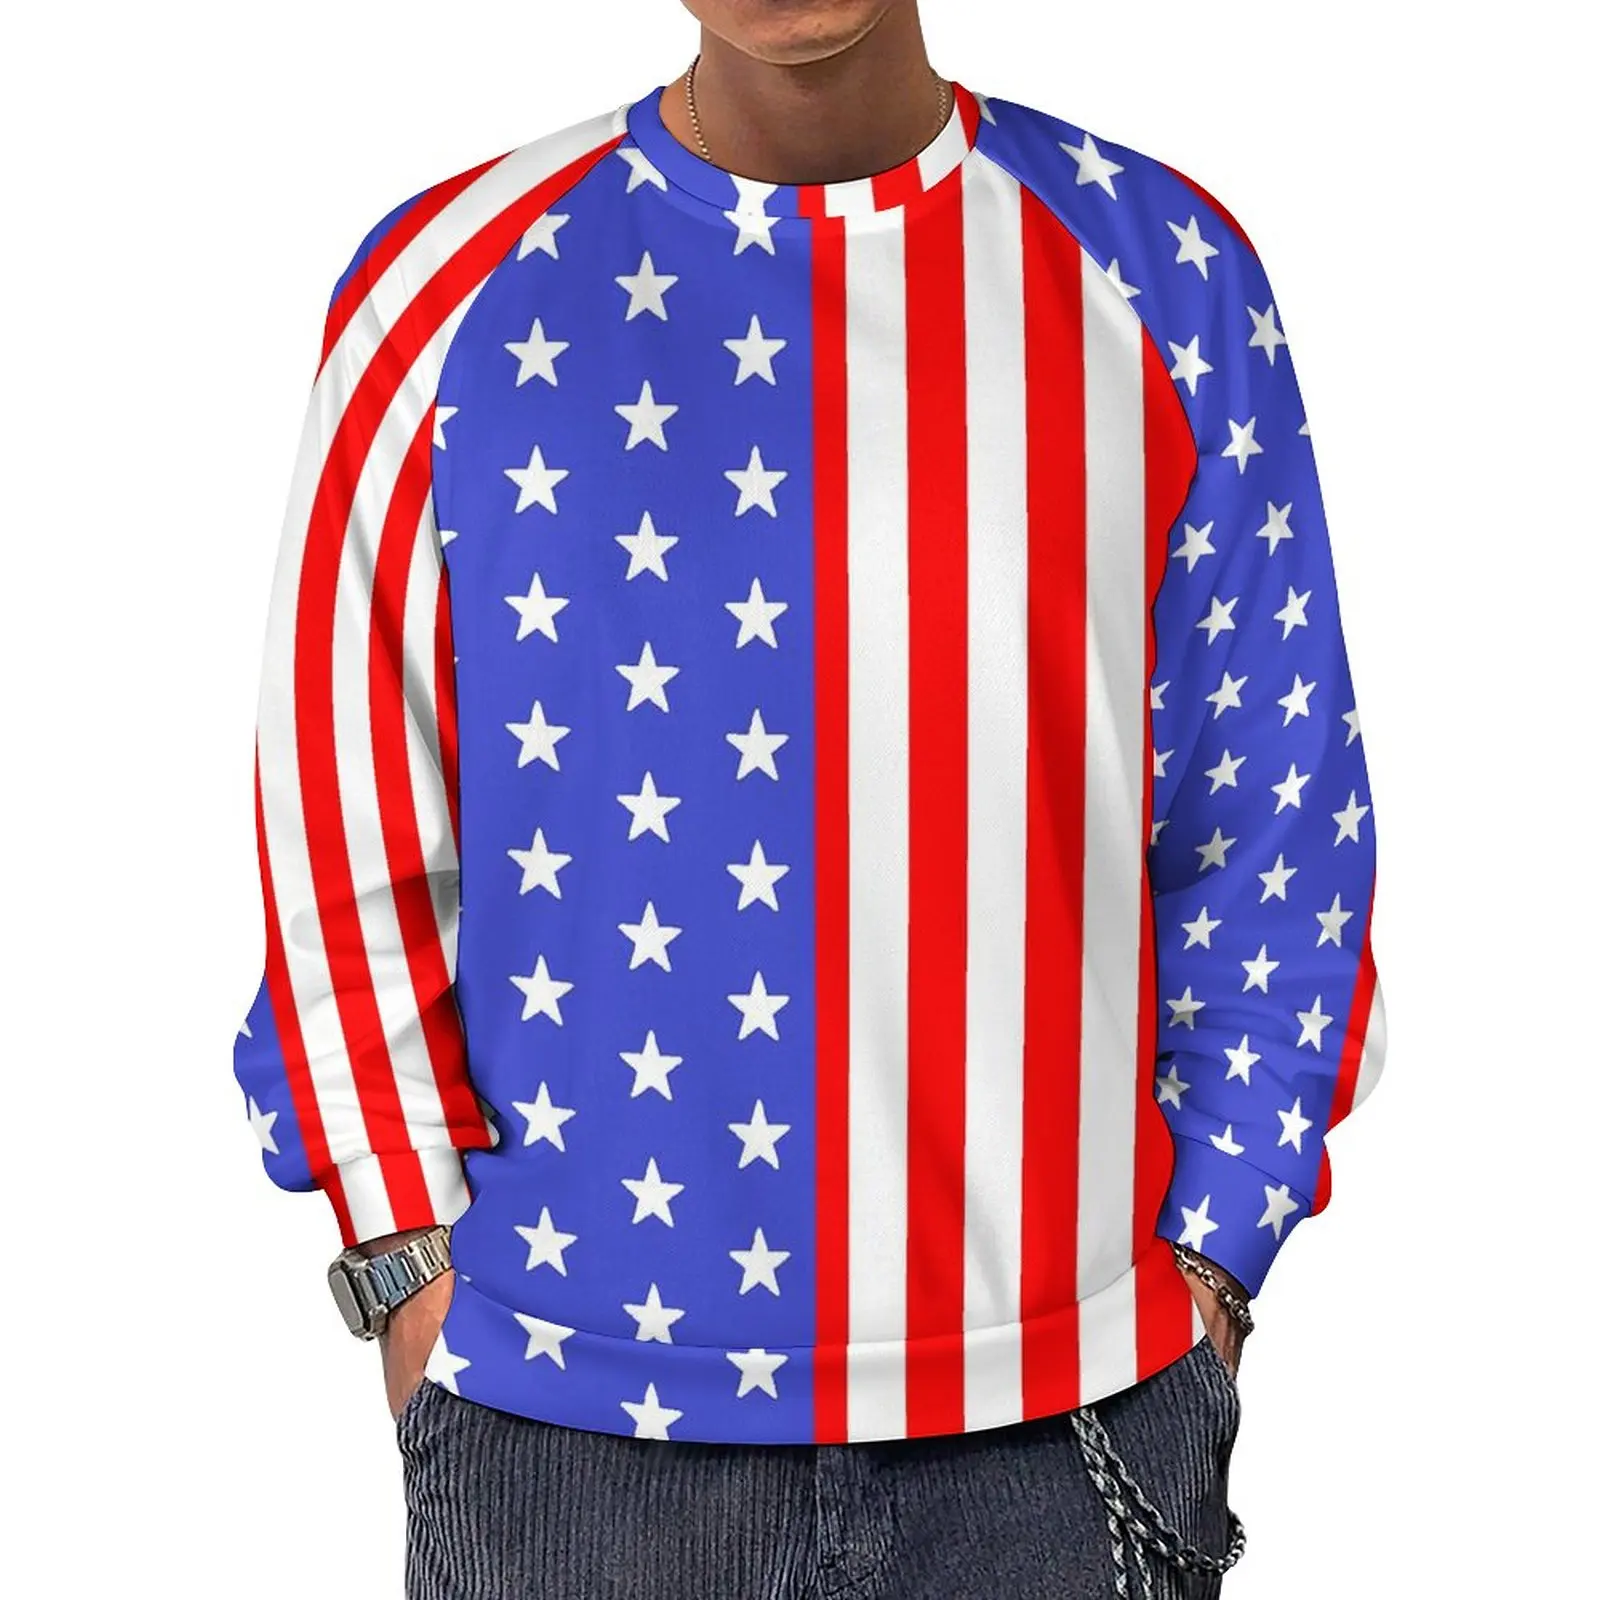 

American Flag Essentials Hoodies Autumn USA Stars and Stripes Outerwear Sweatshirts Couple Modern Graphic Oversized Hoodie